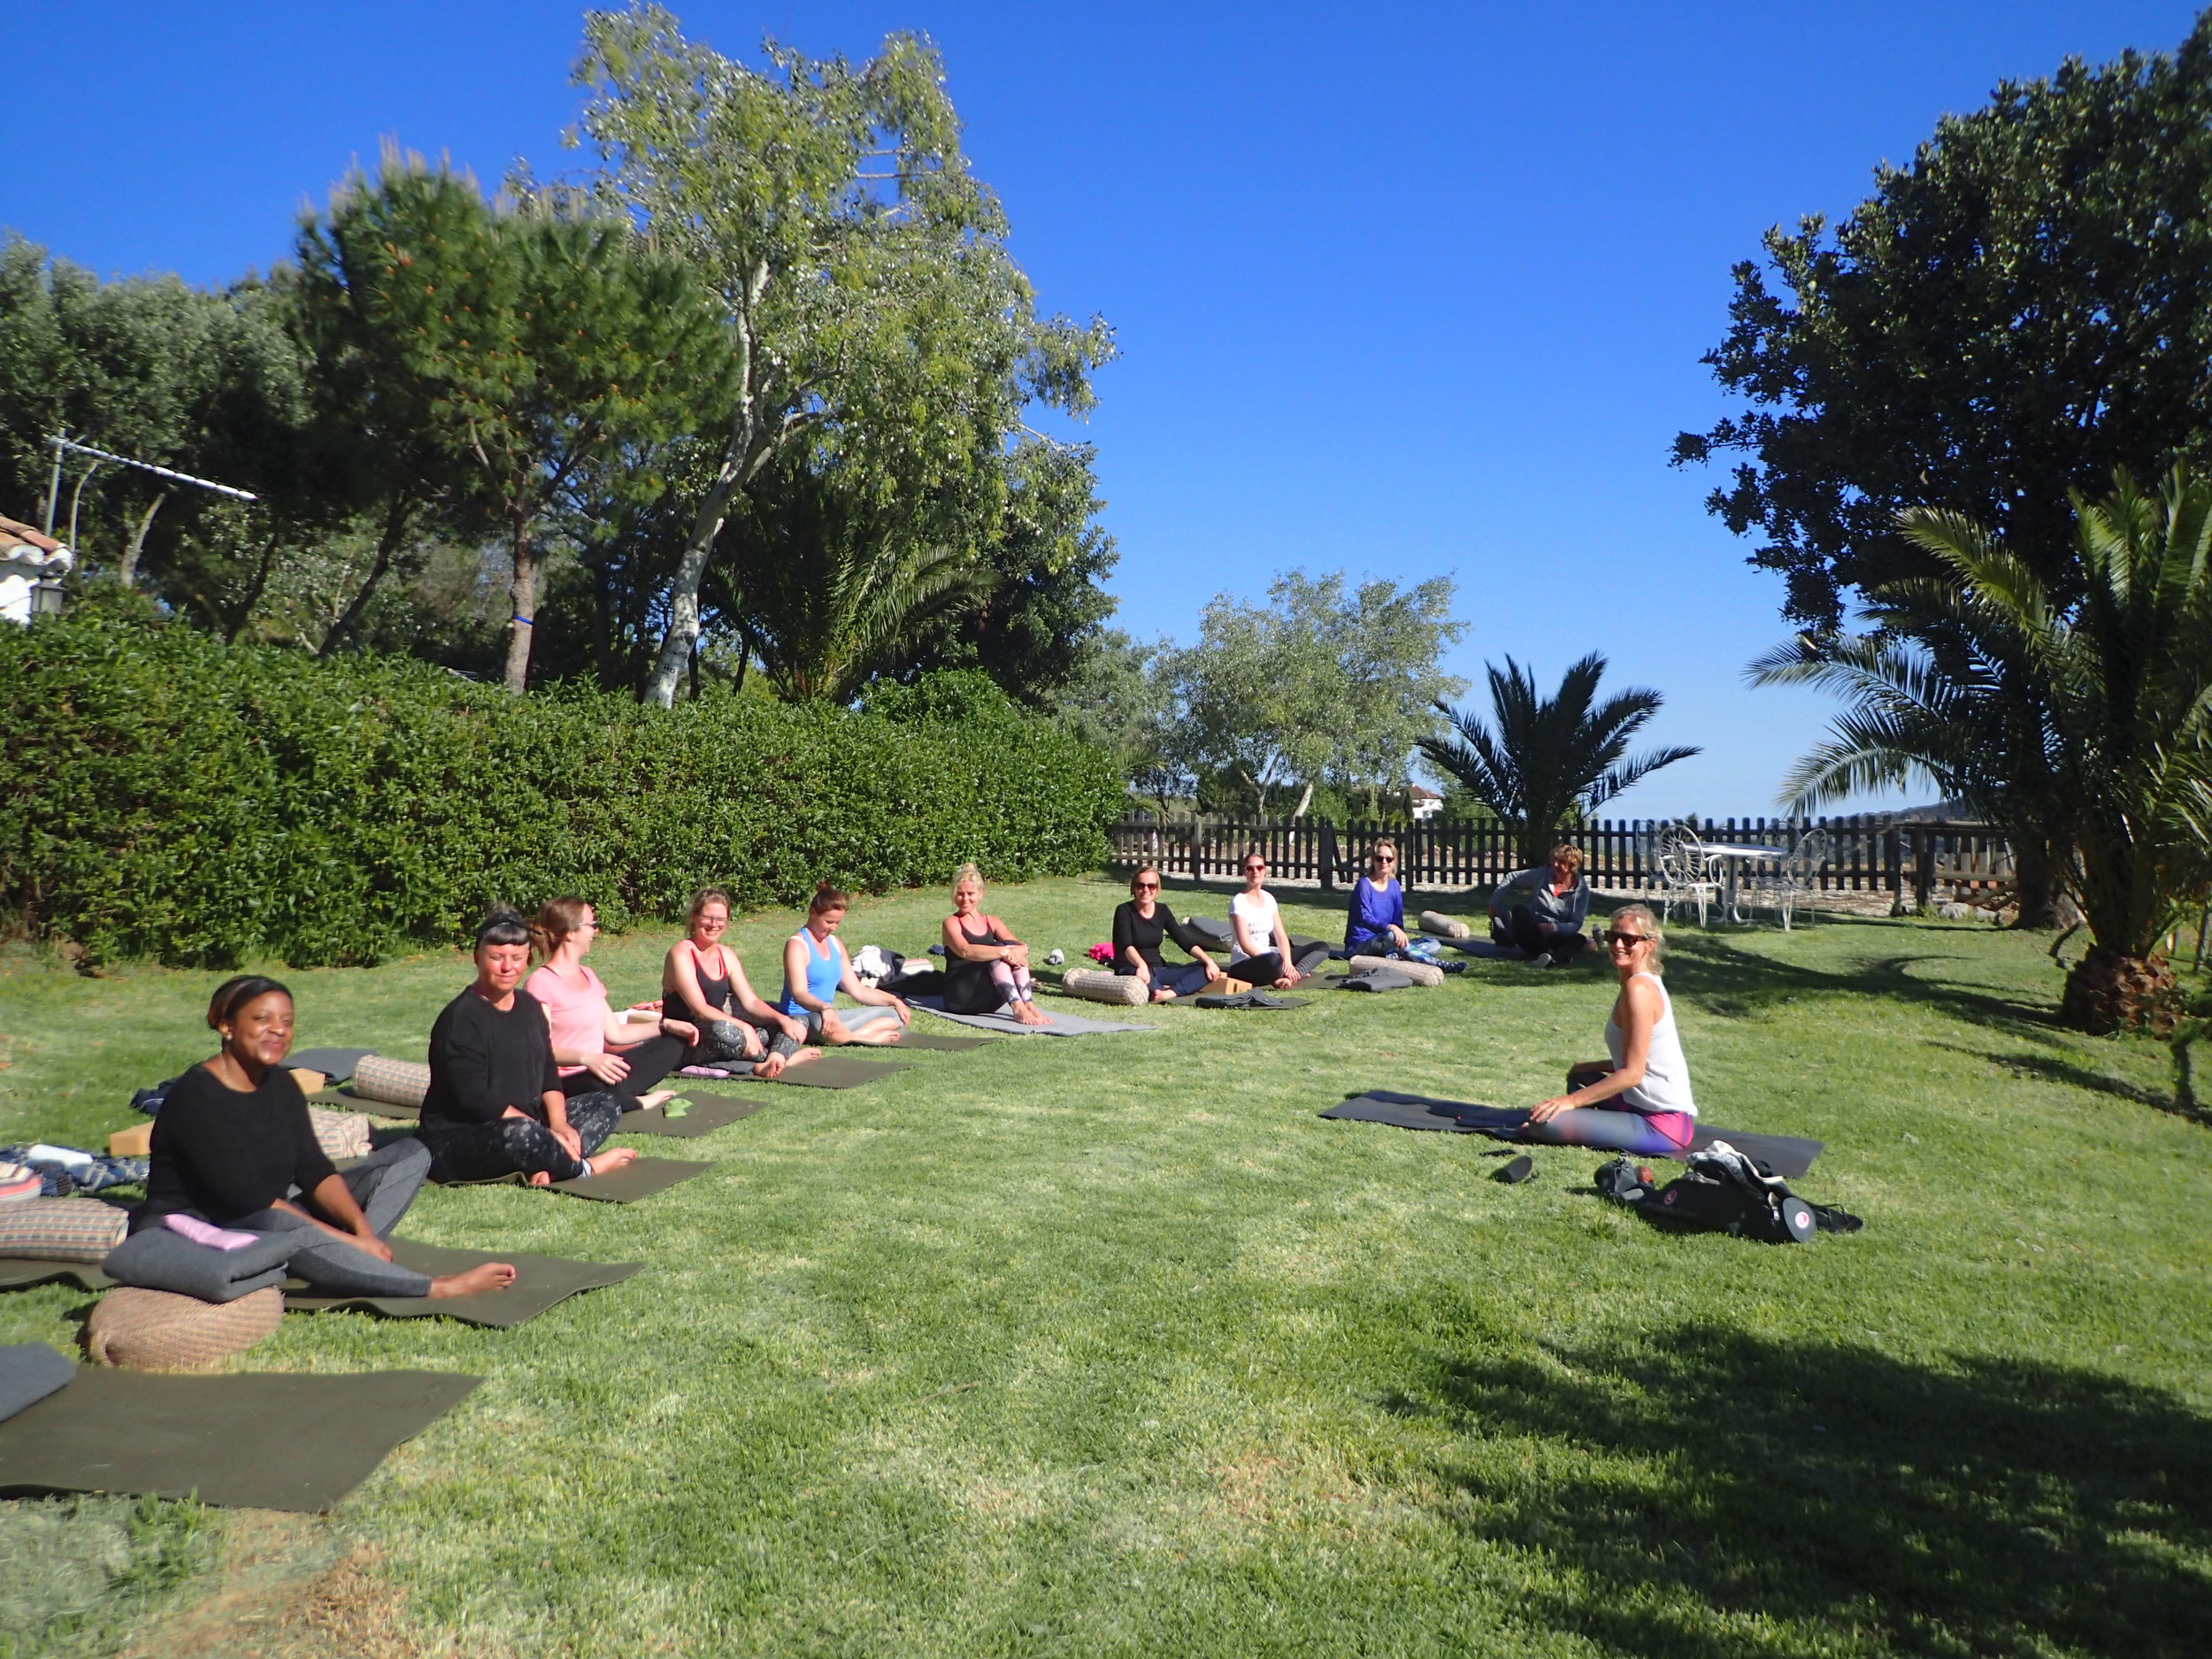 Afternoon yin yoga in the sun at Yin Yang Yoga retreat in the Malaga mountains in Spain with Jane Bakx Yoga